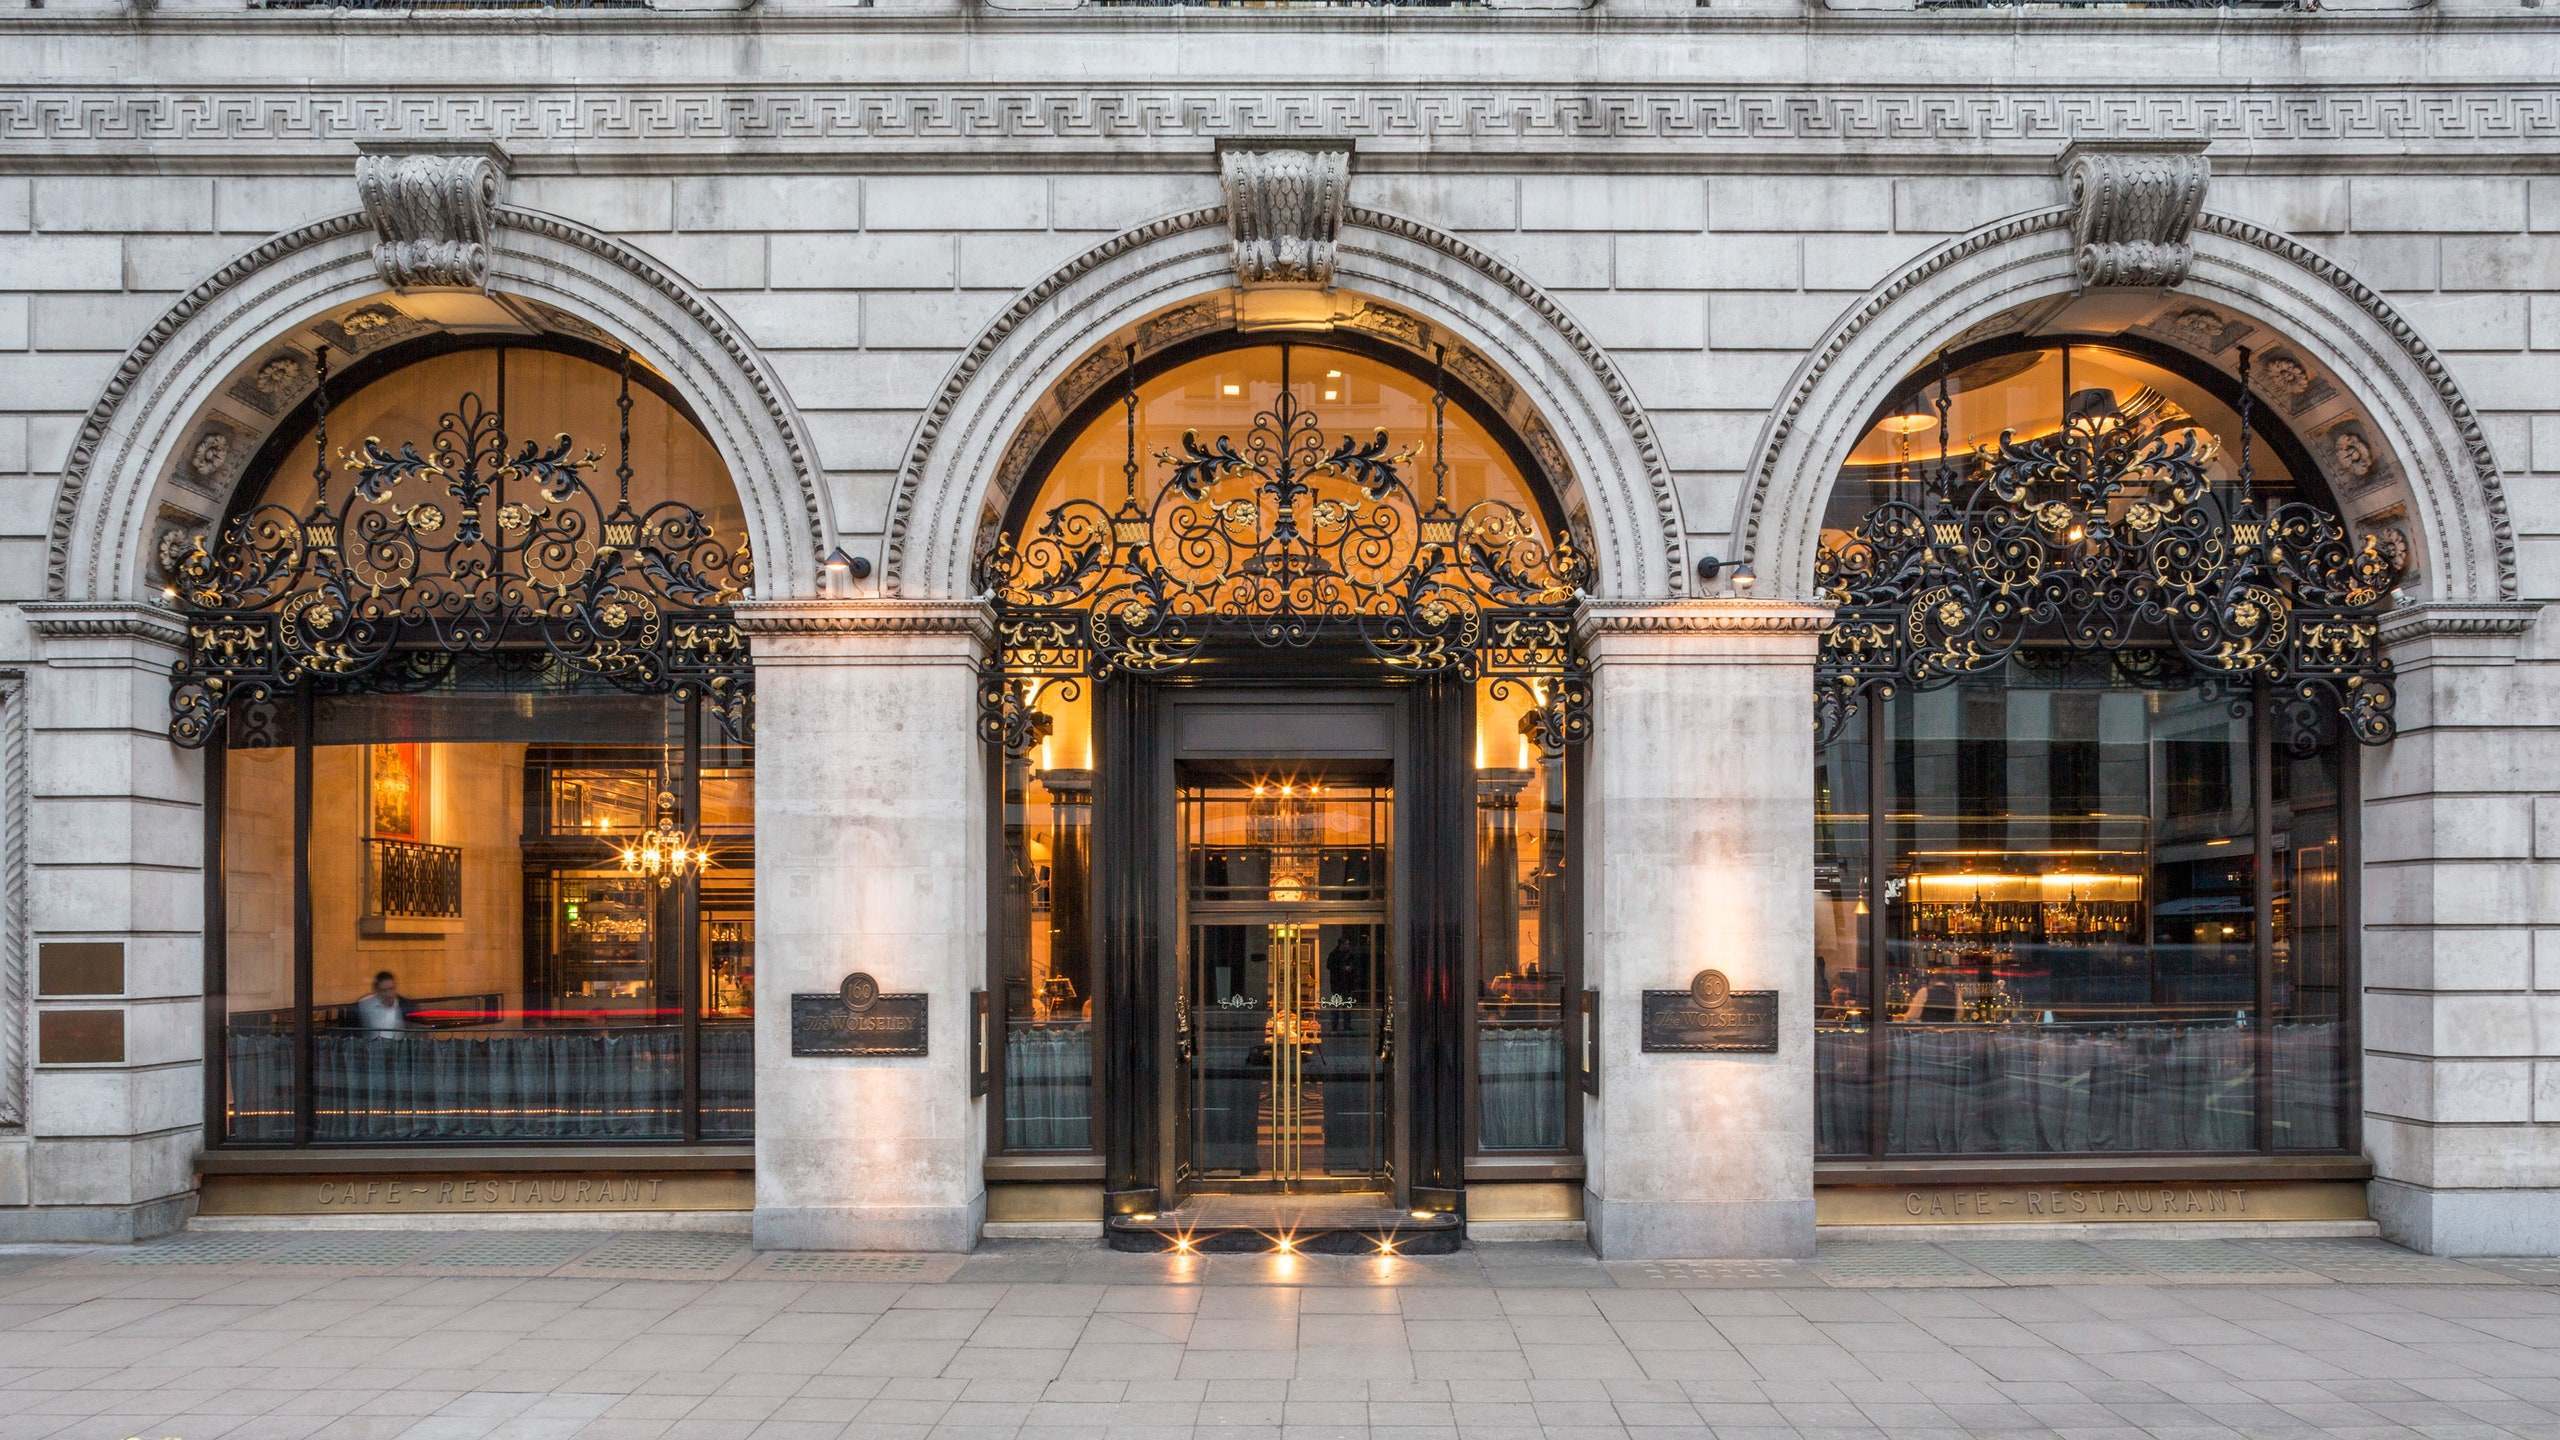 The exterior of The Wolseley in London. Administrators were appointed for its parent company, Corbin & King, after its largest shareholder, the Thai hospitality group Minor Hotels, accused it of failing to meet its financial obligations.